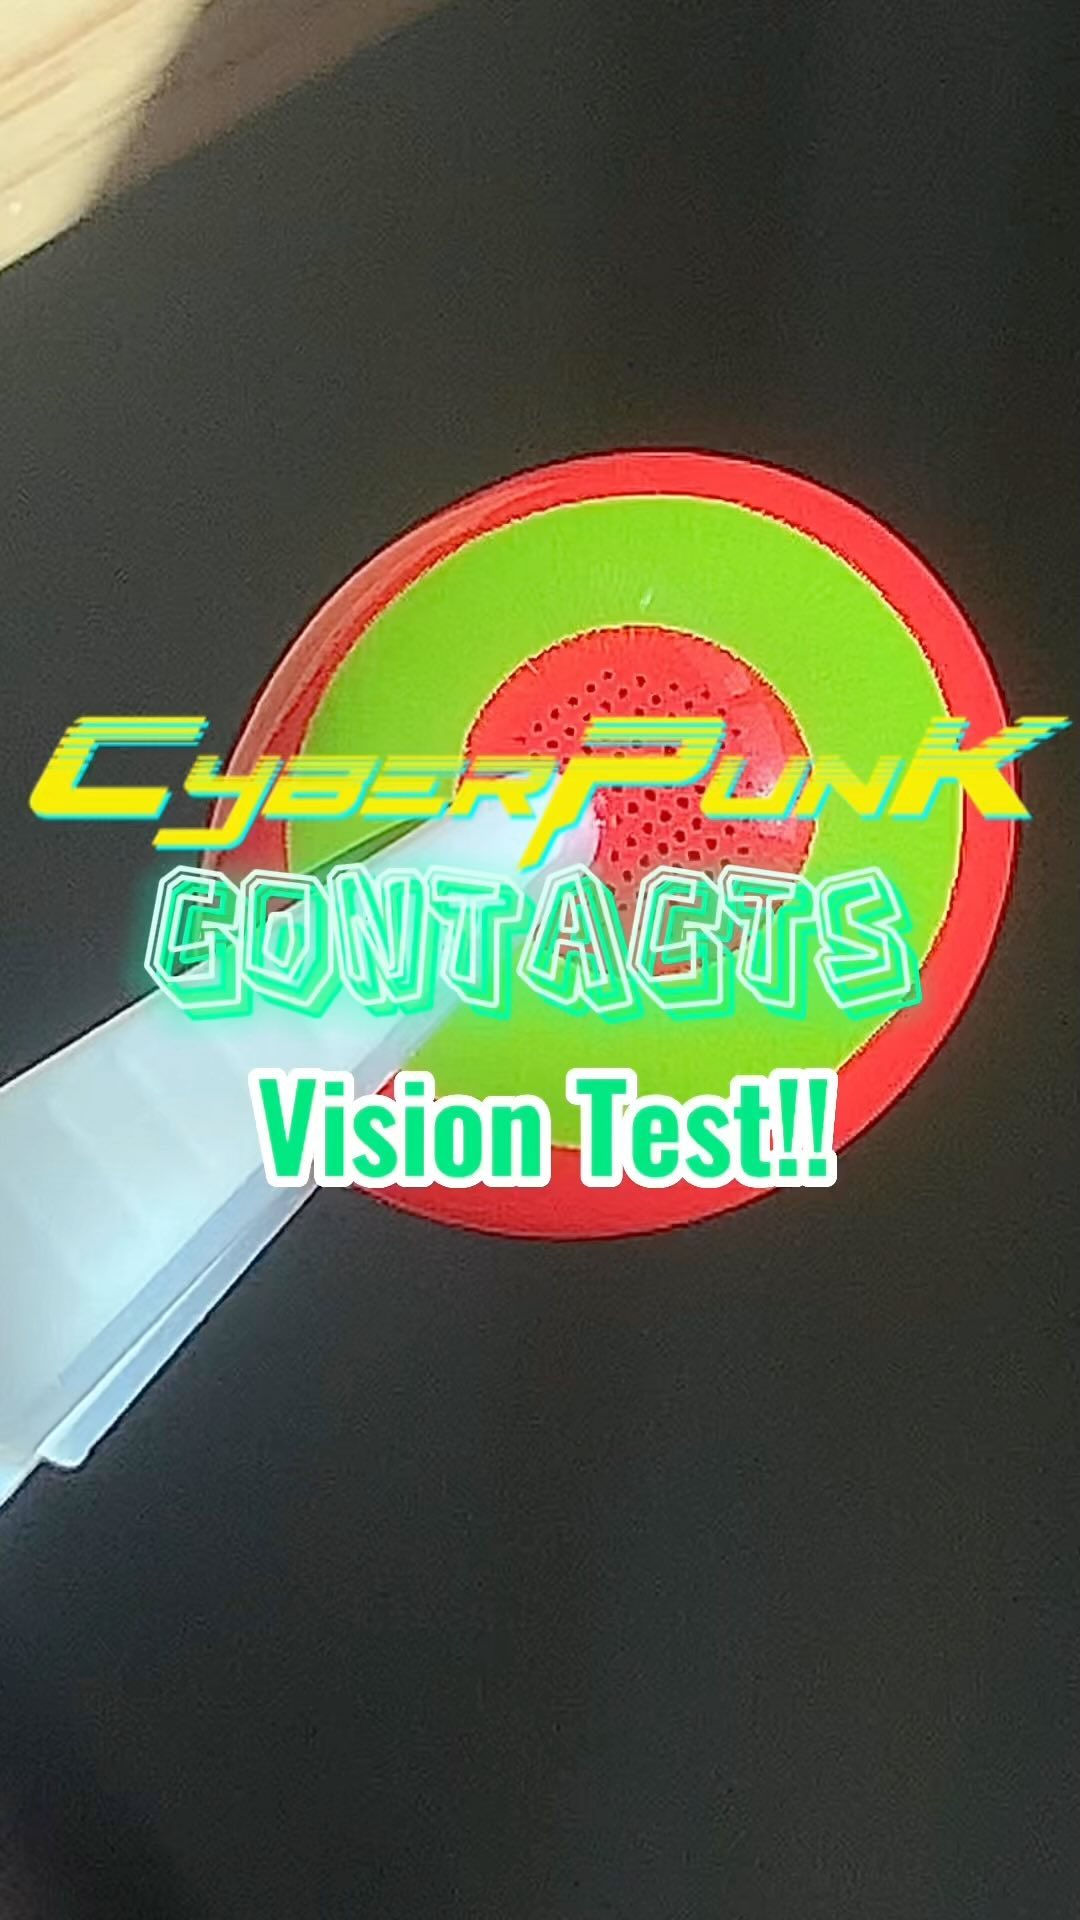 🛸 VISION TEST 🛸

Our Cyberpunk Series is finally complete and yes!! Rebecca contacts are open for pre-order NOW 😍❤️ #bestgirl

Disclaimer: Vision tests are not entirely accurate and may be clearer once worn on an actual eye.
.
.
.
⁡#uniqso #uniqsocontacts #cosplay #cosplaycontacts #sweetycon #contactlenses #freedelivery #worldwideshipping #highvibrancy #cyberpunk #cyberpunk2077 #cyberpunkedgerunners #rebeccacyberpunk #lucycyberpunk